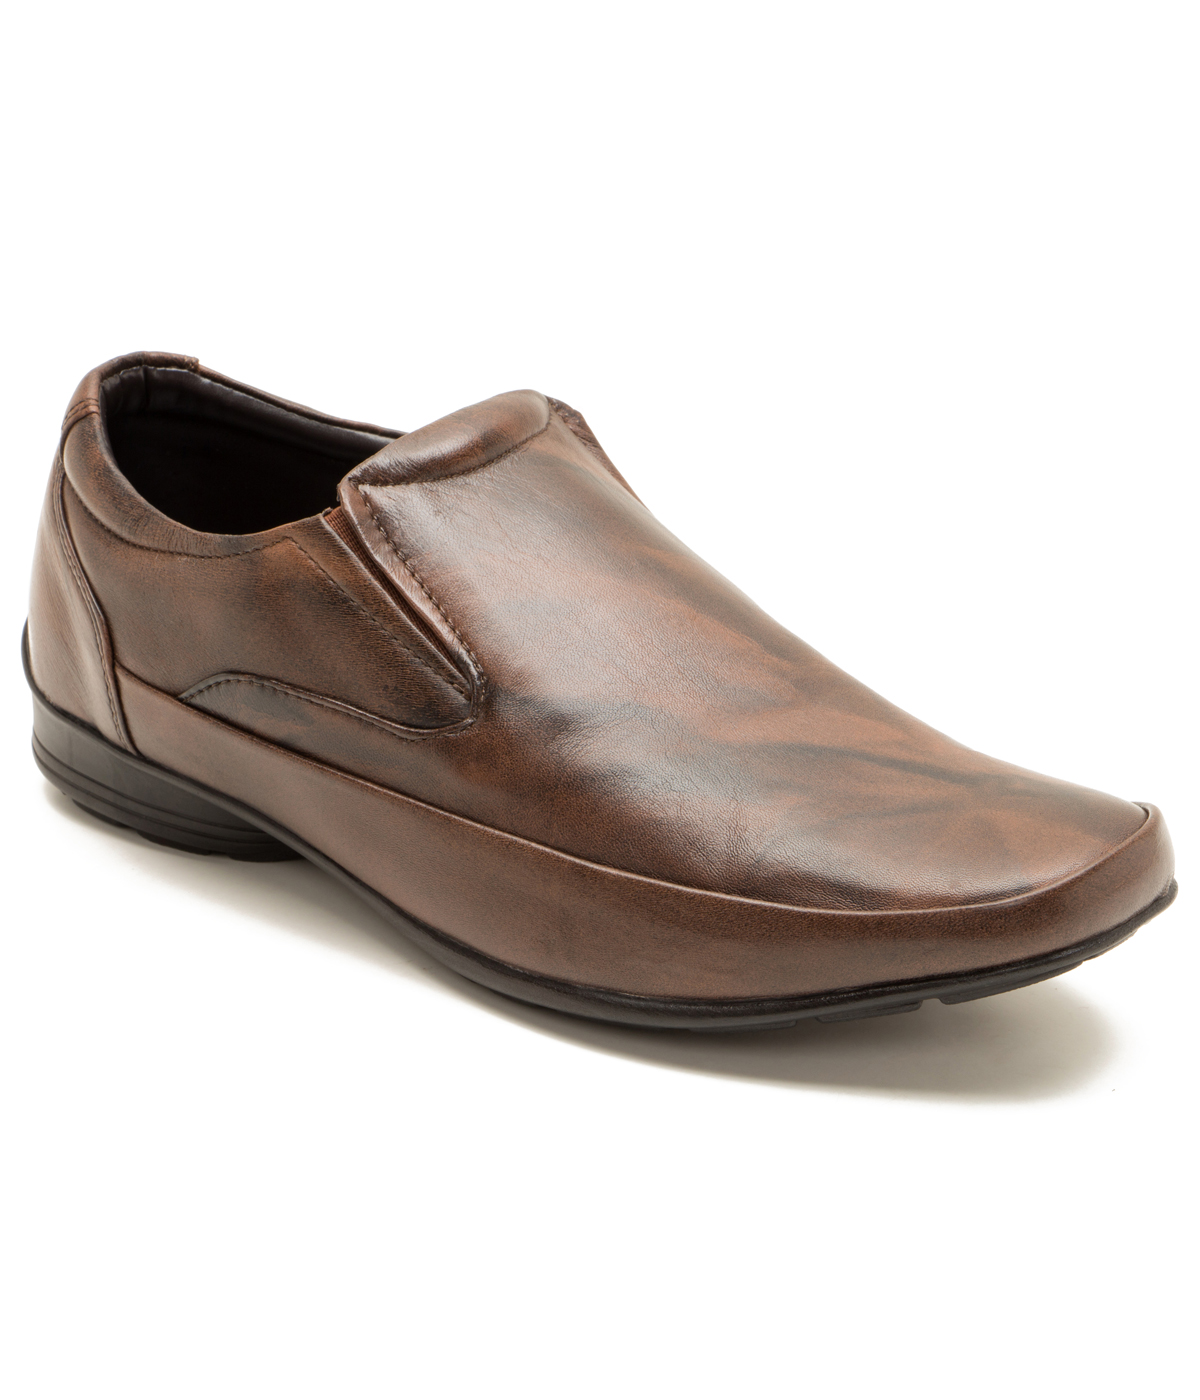 Buy Franco Leone BROWN Leather FormalShoes Online @ ₹1398 from ShopClues